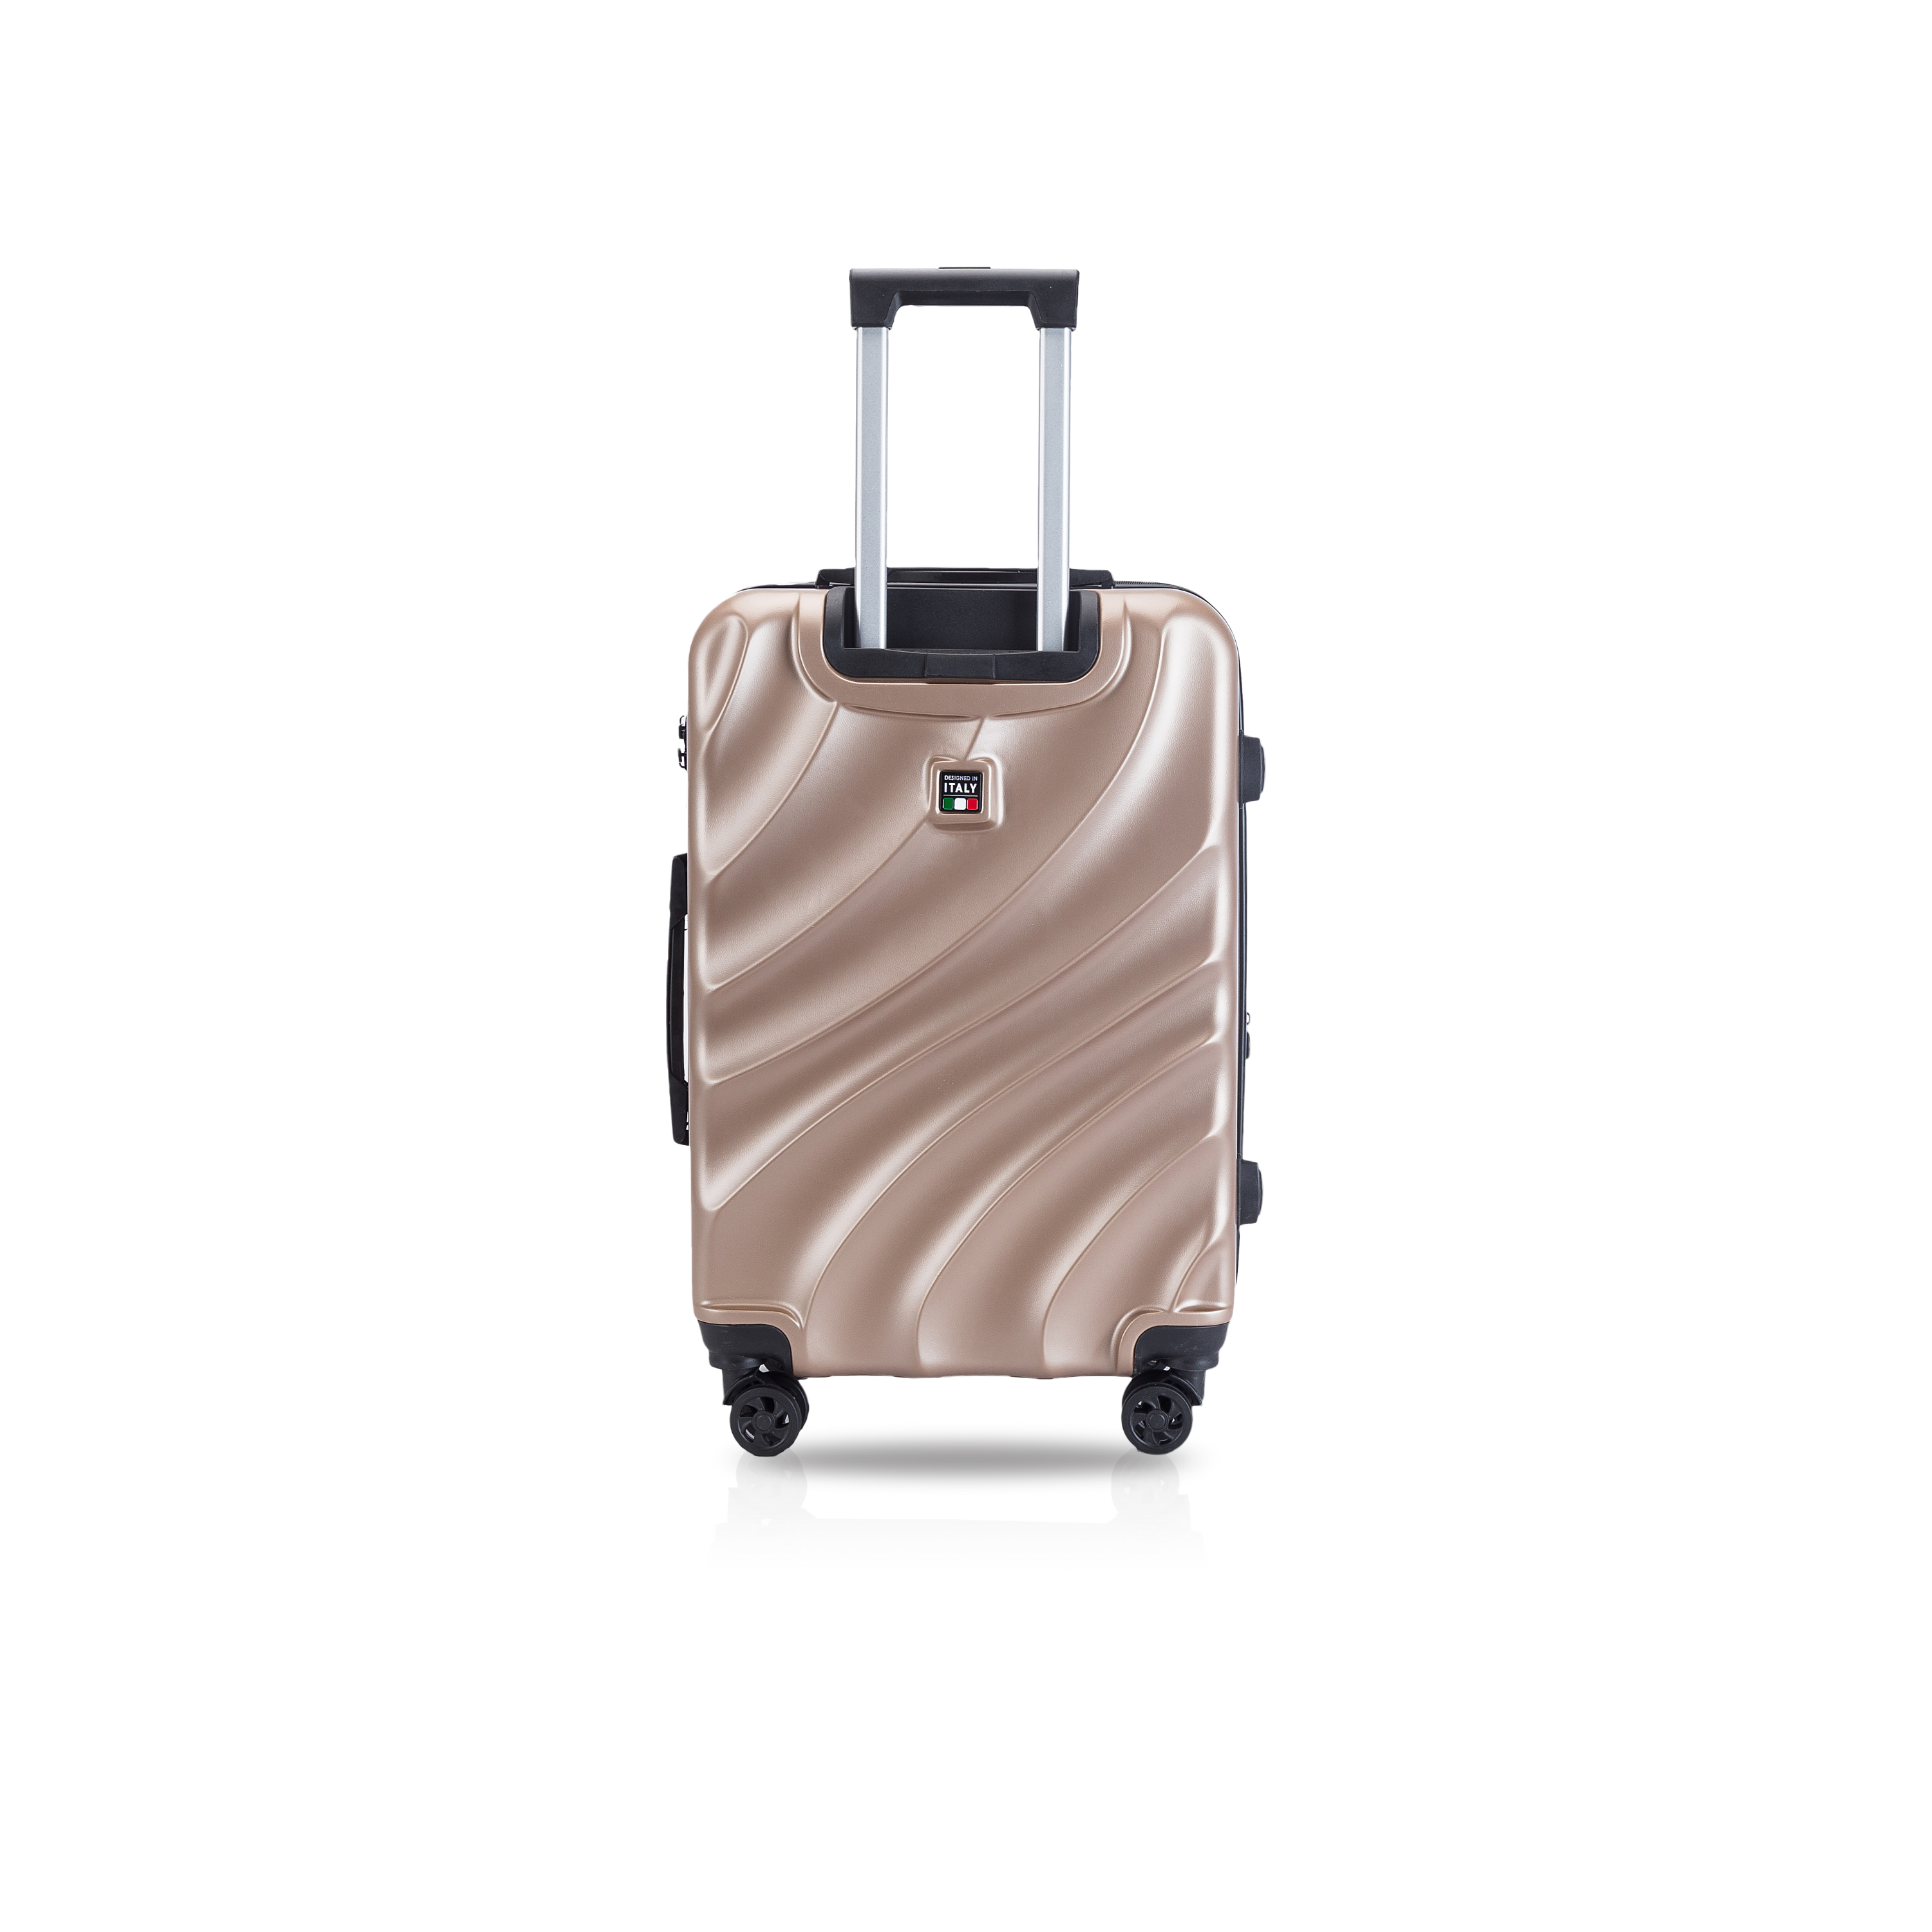 TUCCI CREMOSA ABS 28" Travel Luggage